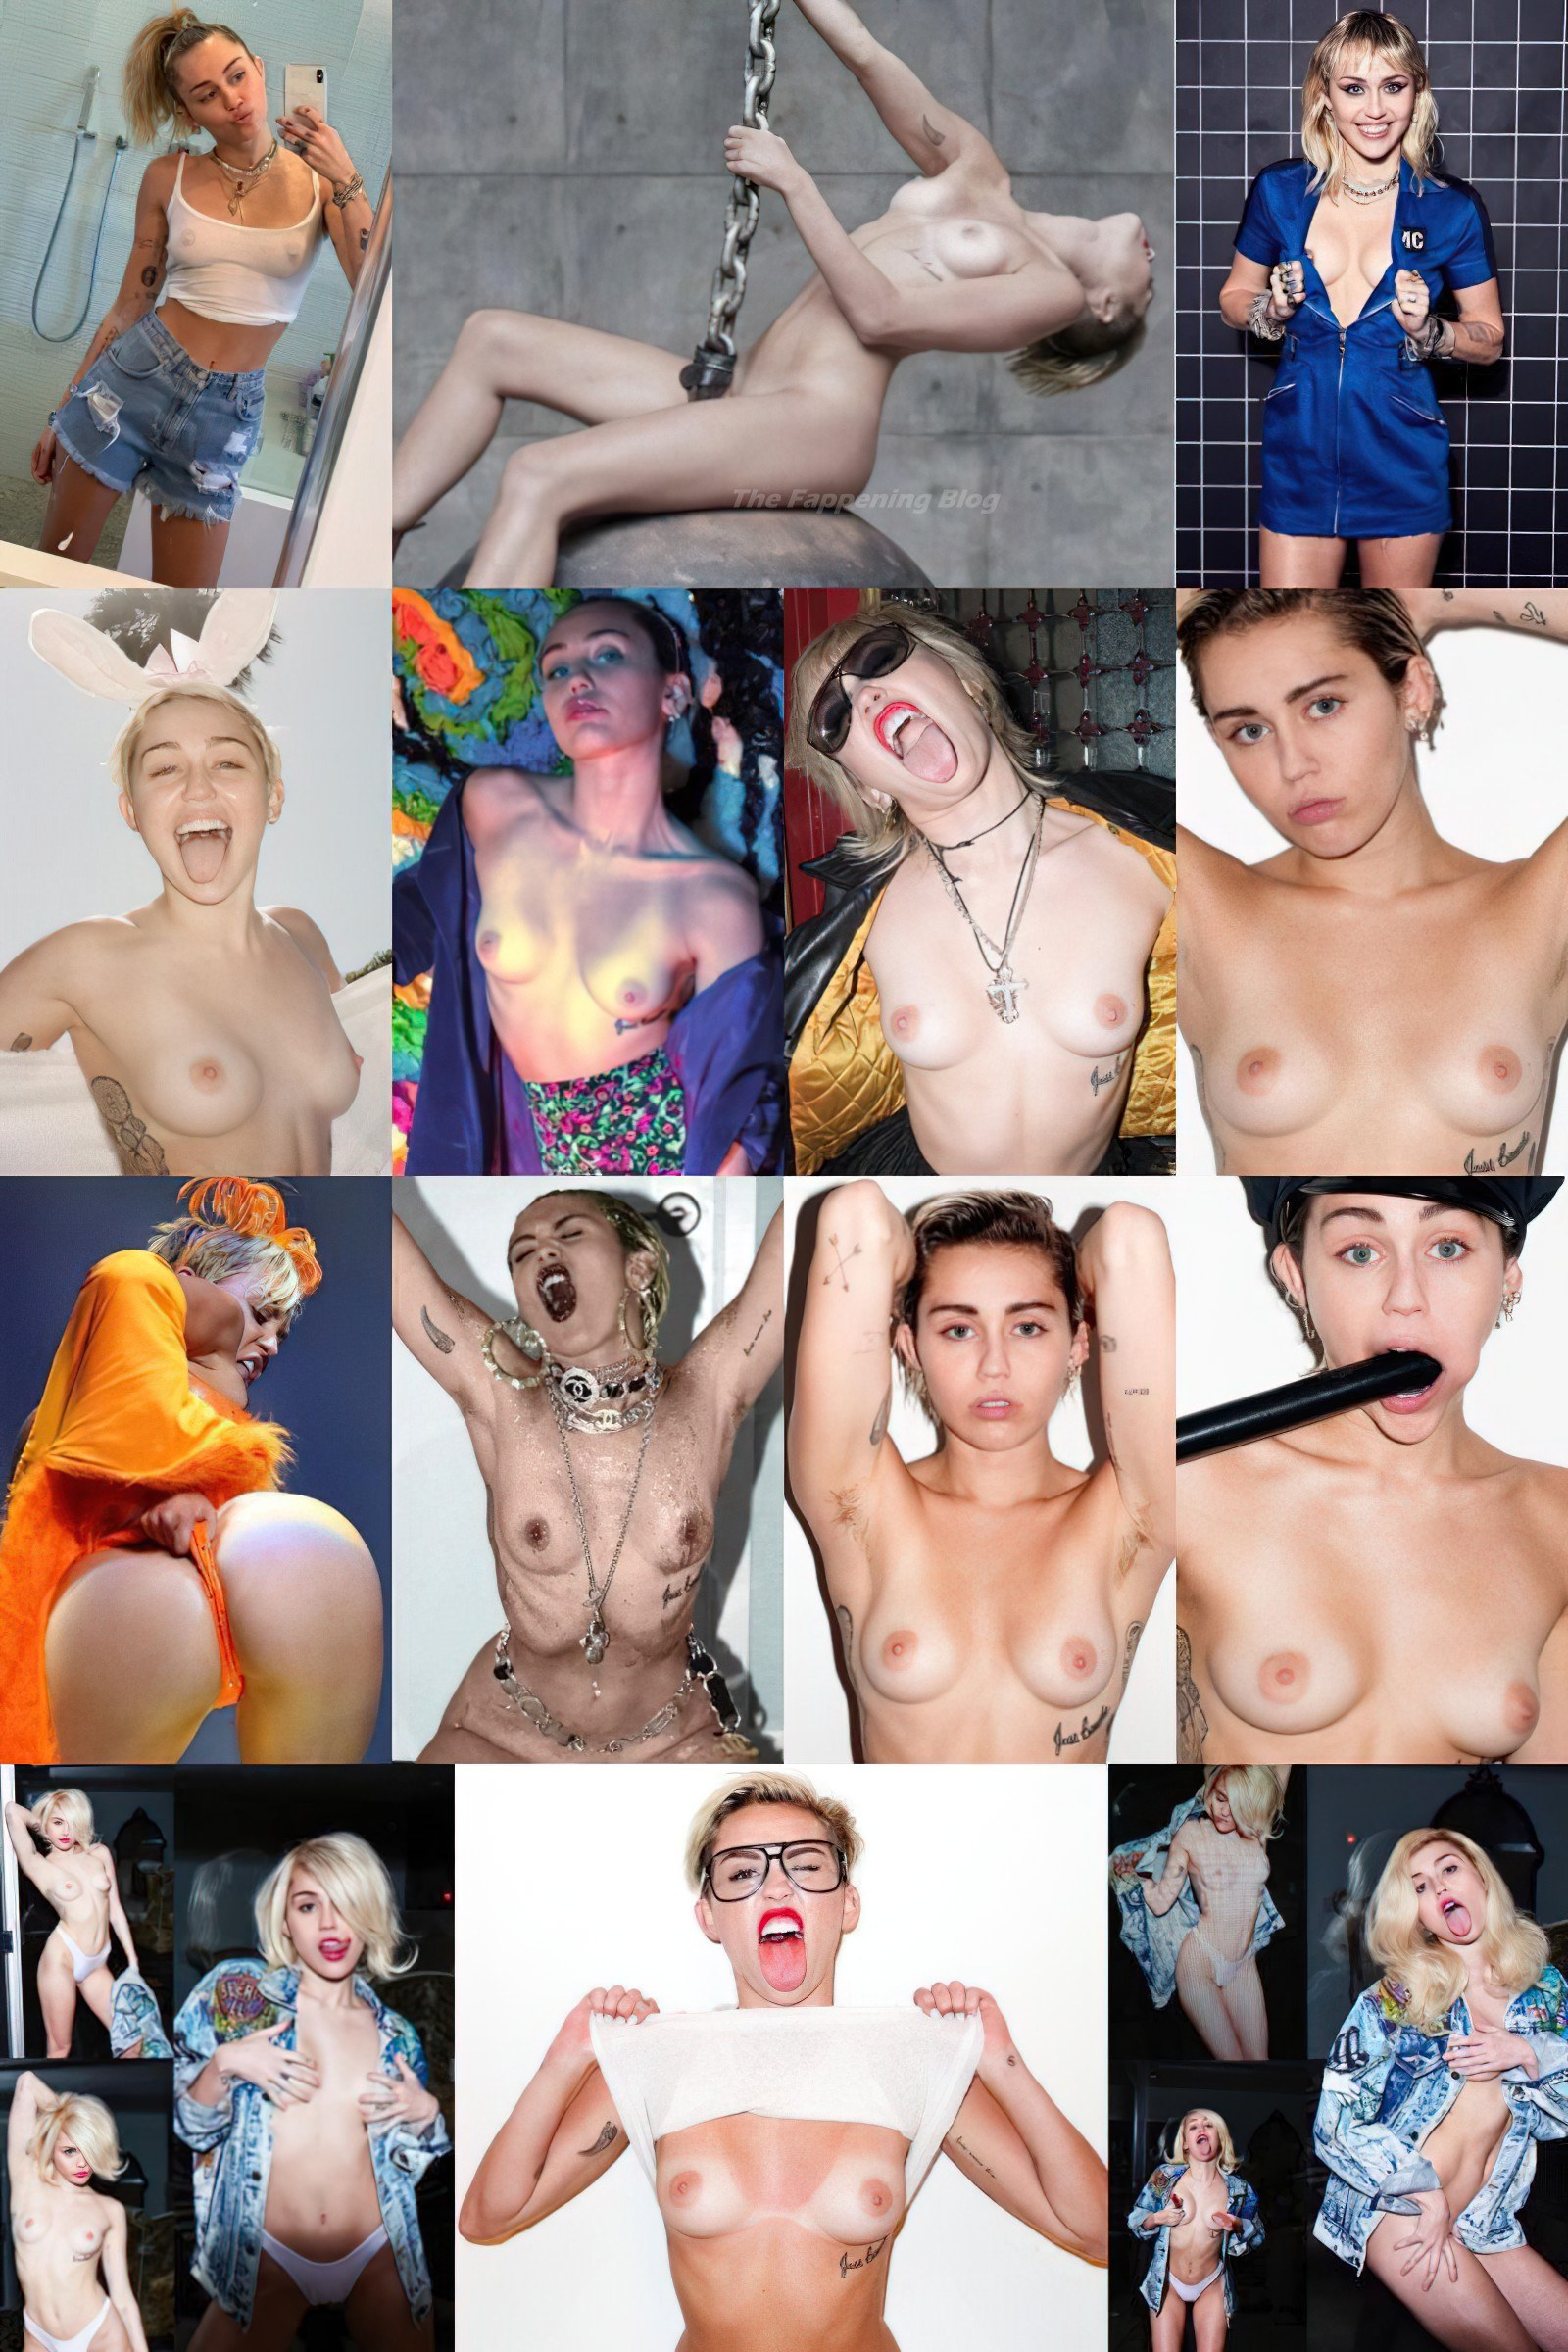 Miley cyrus onlyfans nudes